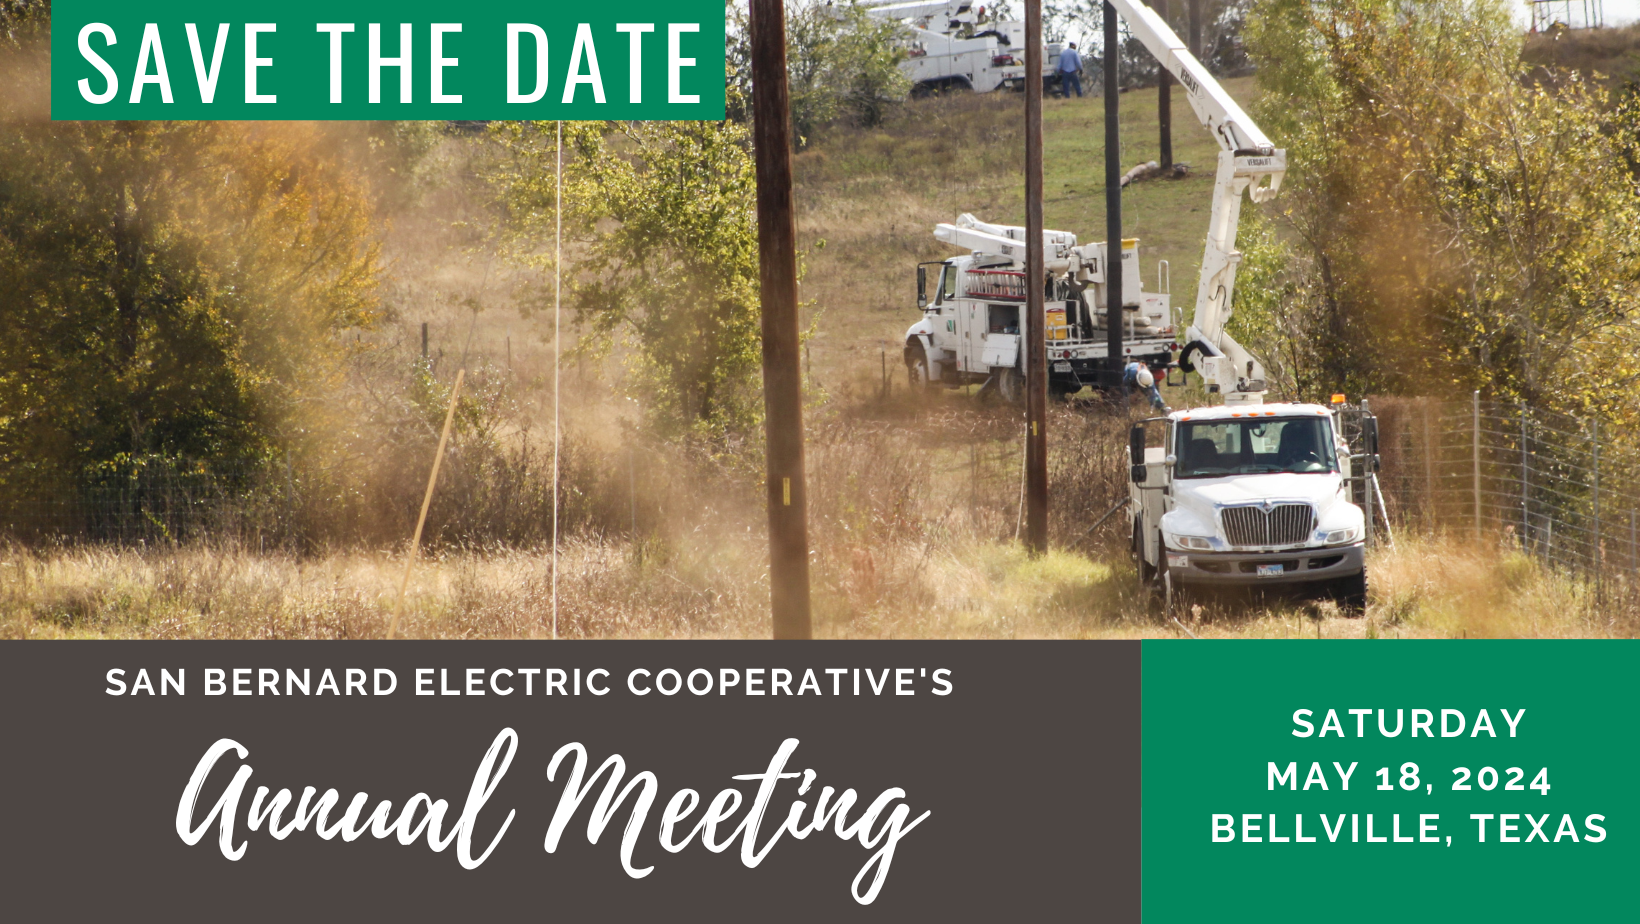 Annual Meeting Save the Date